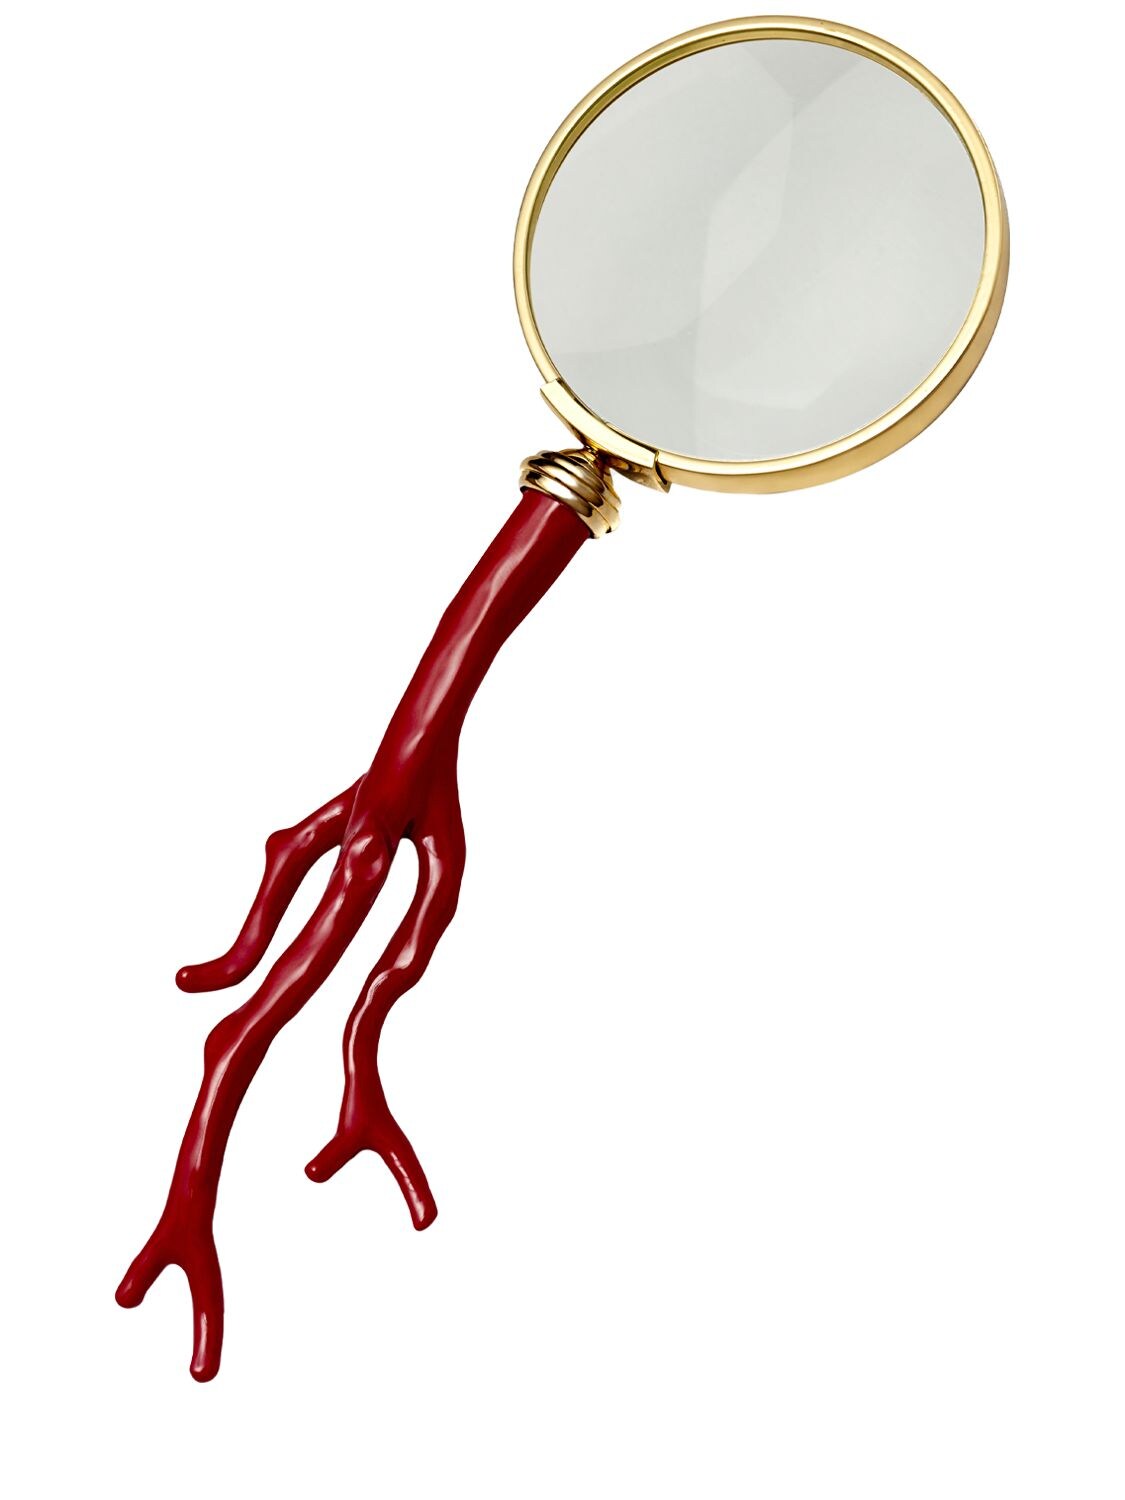 L'OBJET 'CORAL' MAGNIFYING GLASS